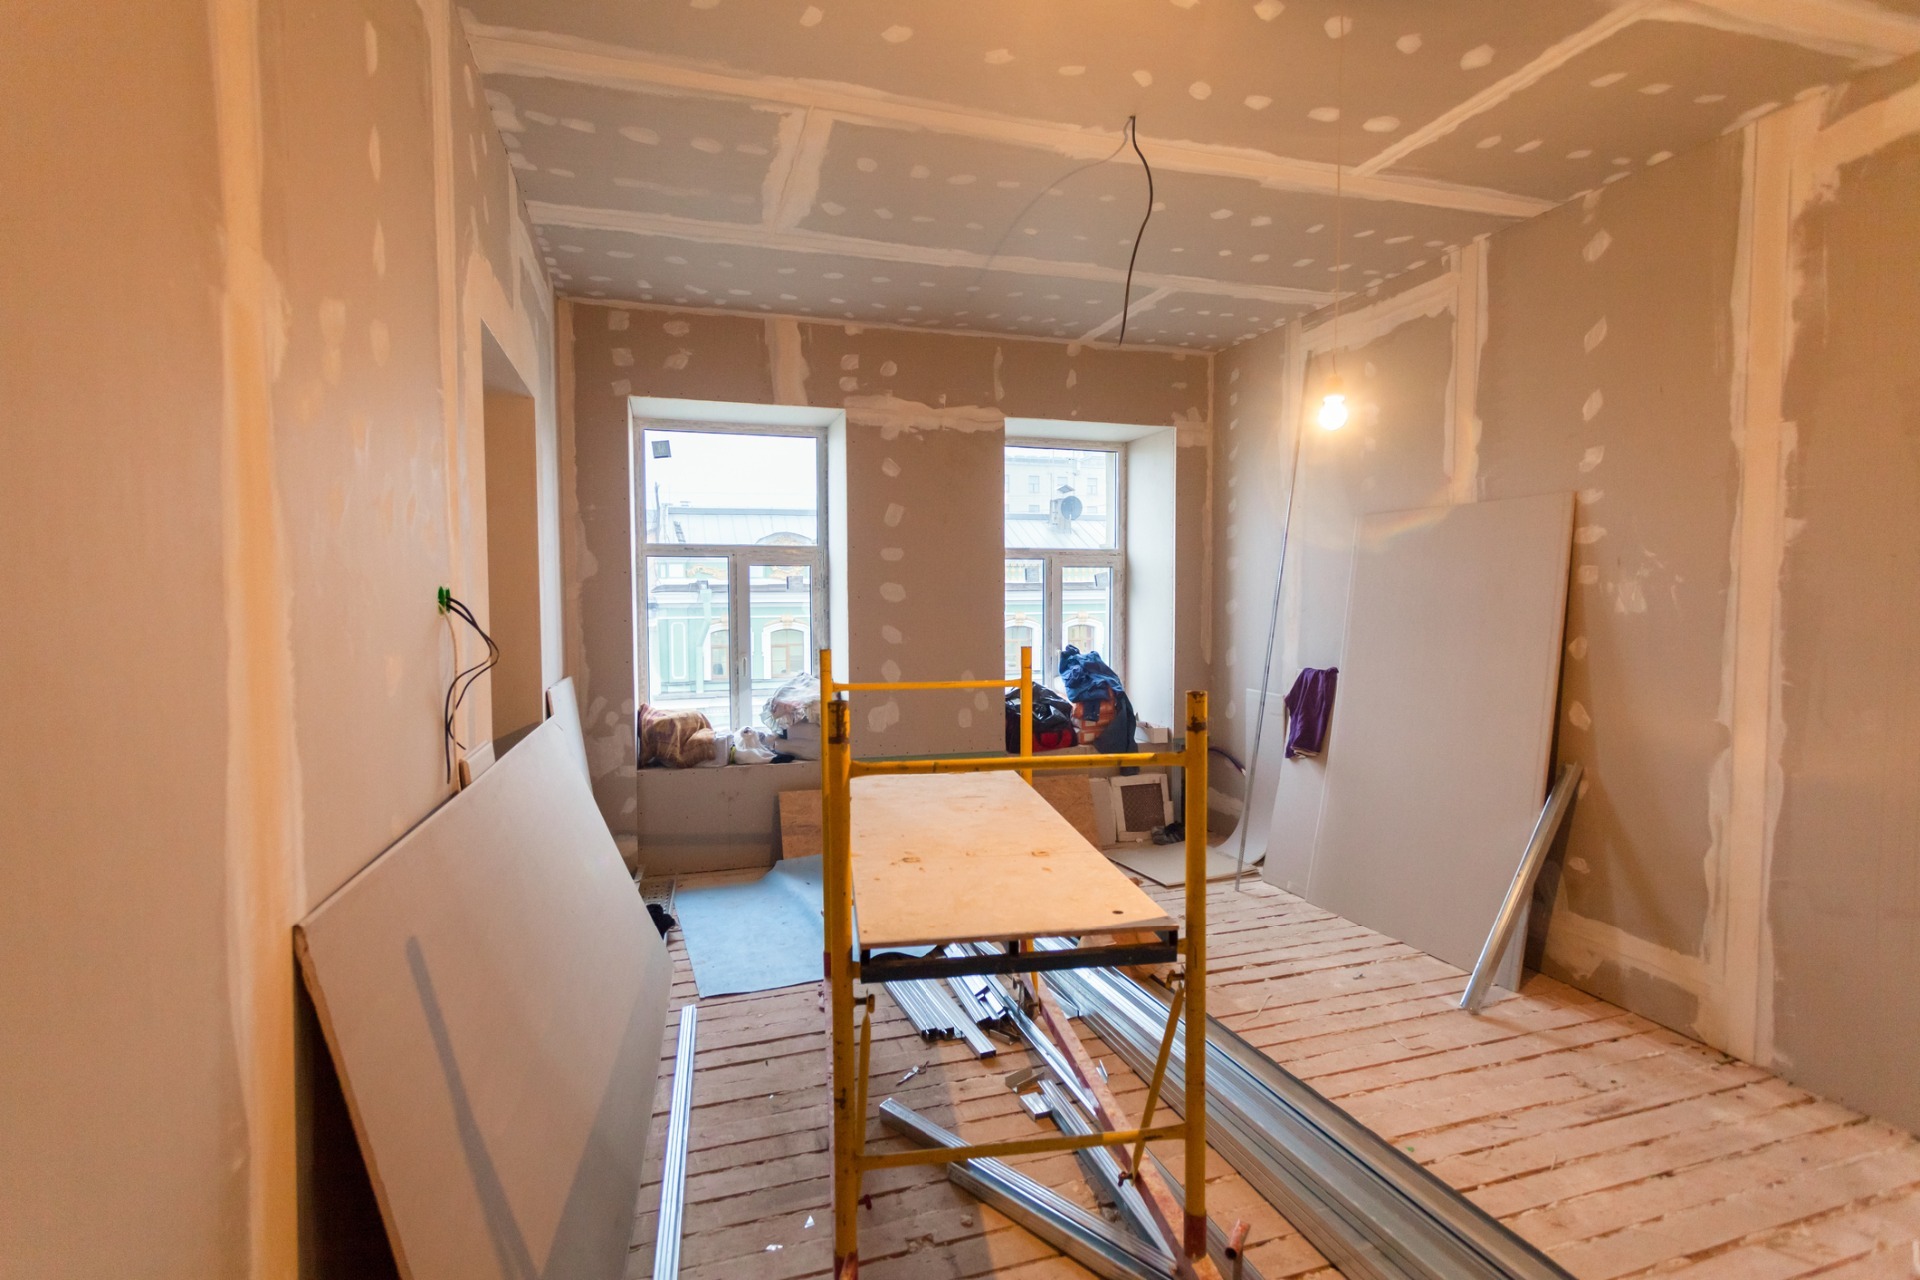 A room being renovated